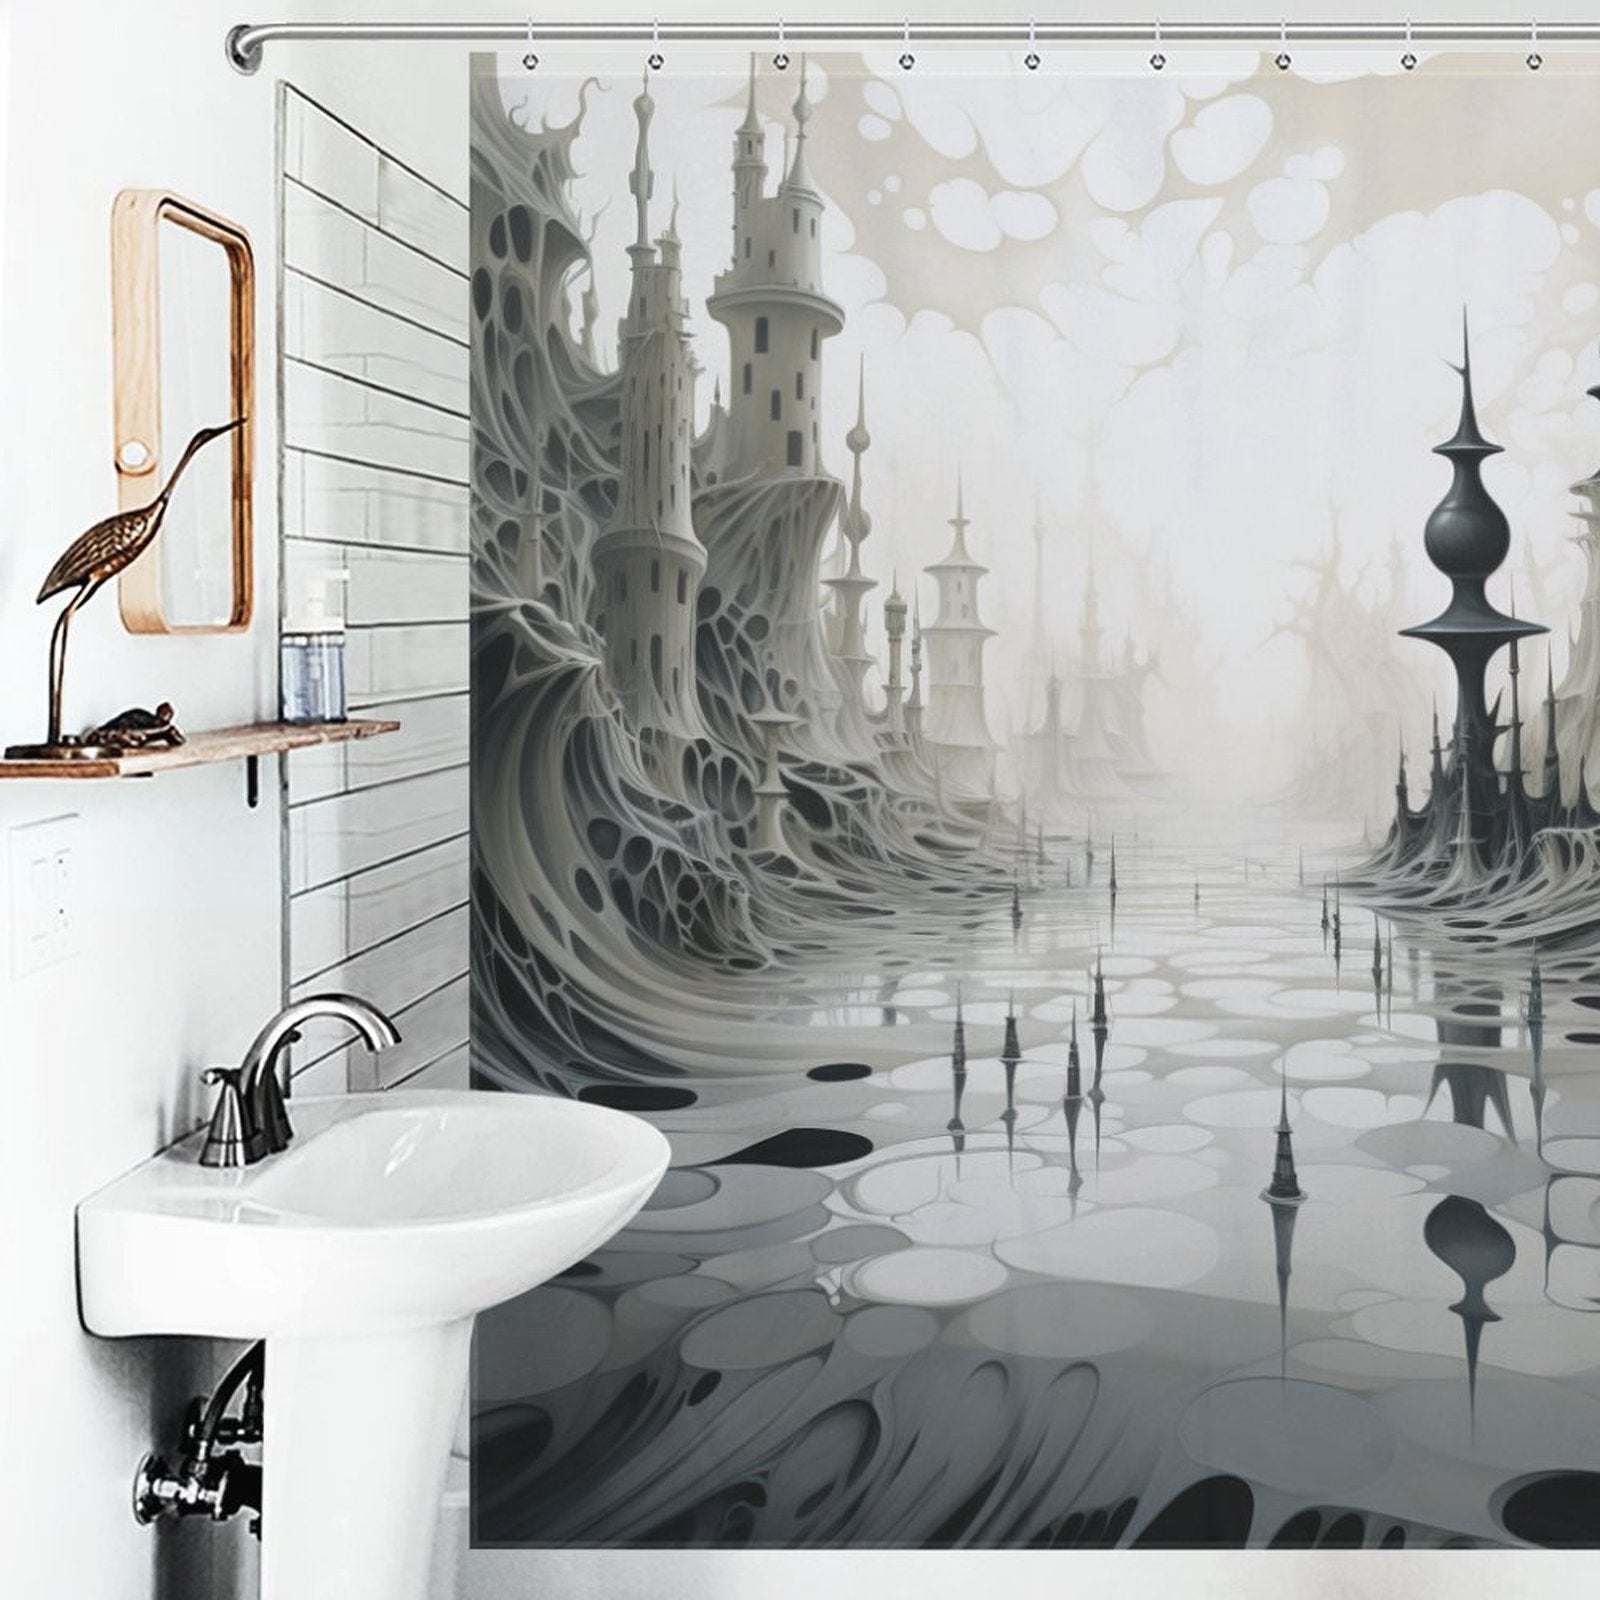 Classic Contrast Black and White Shower Curtain